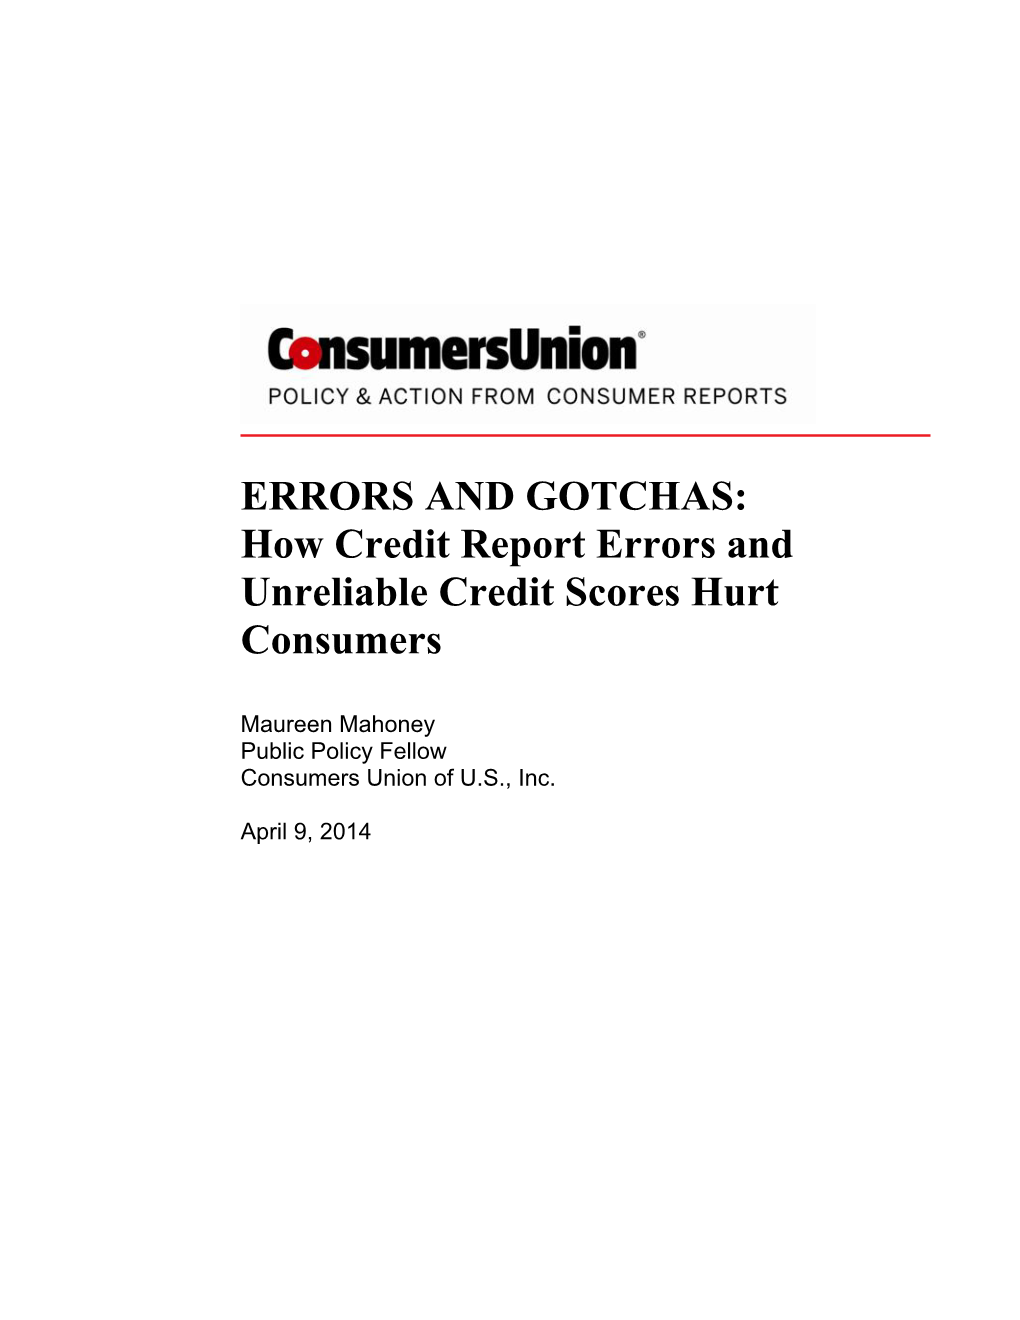 How Credit Report Errors and Unreliable Credit Scores Hurt Consumers